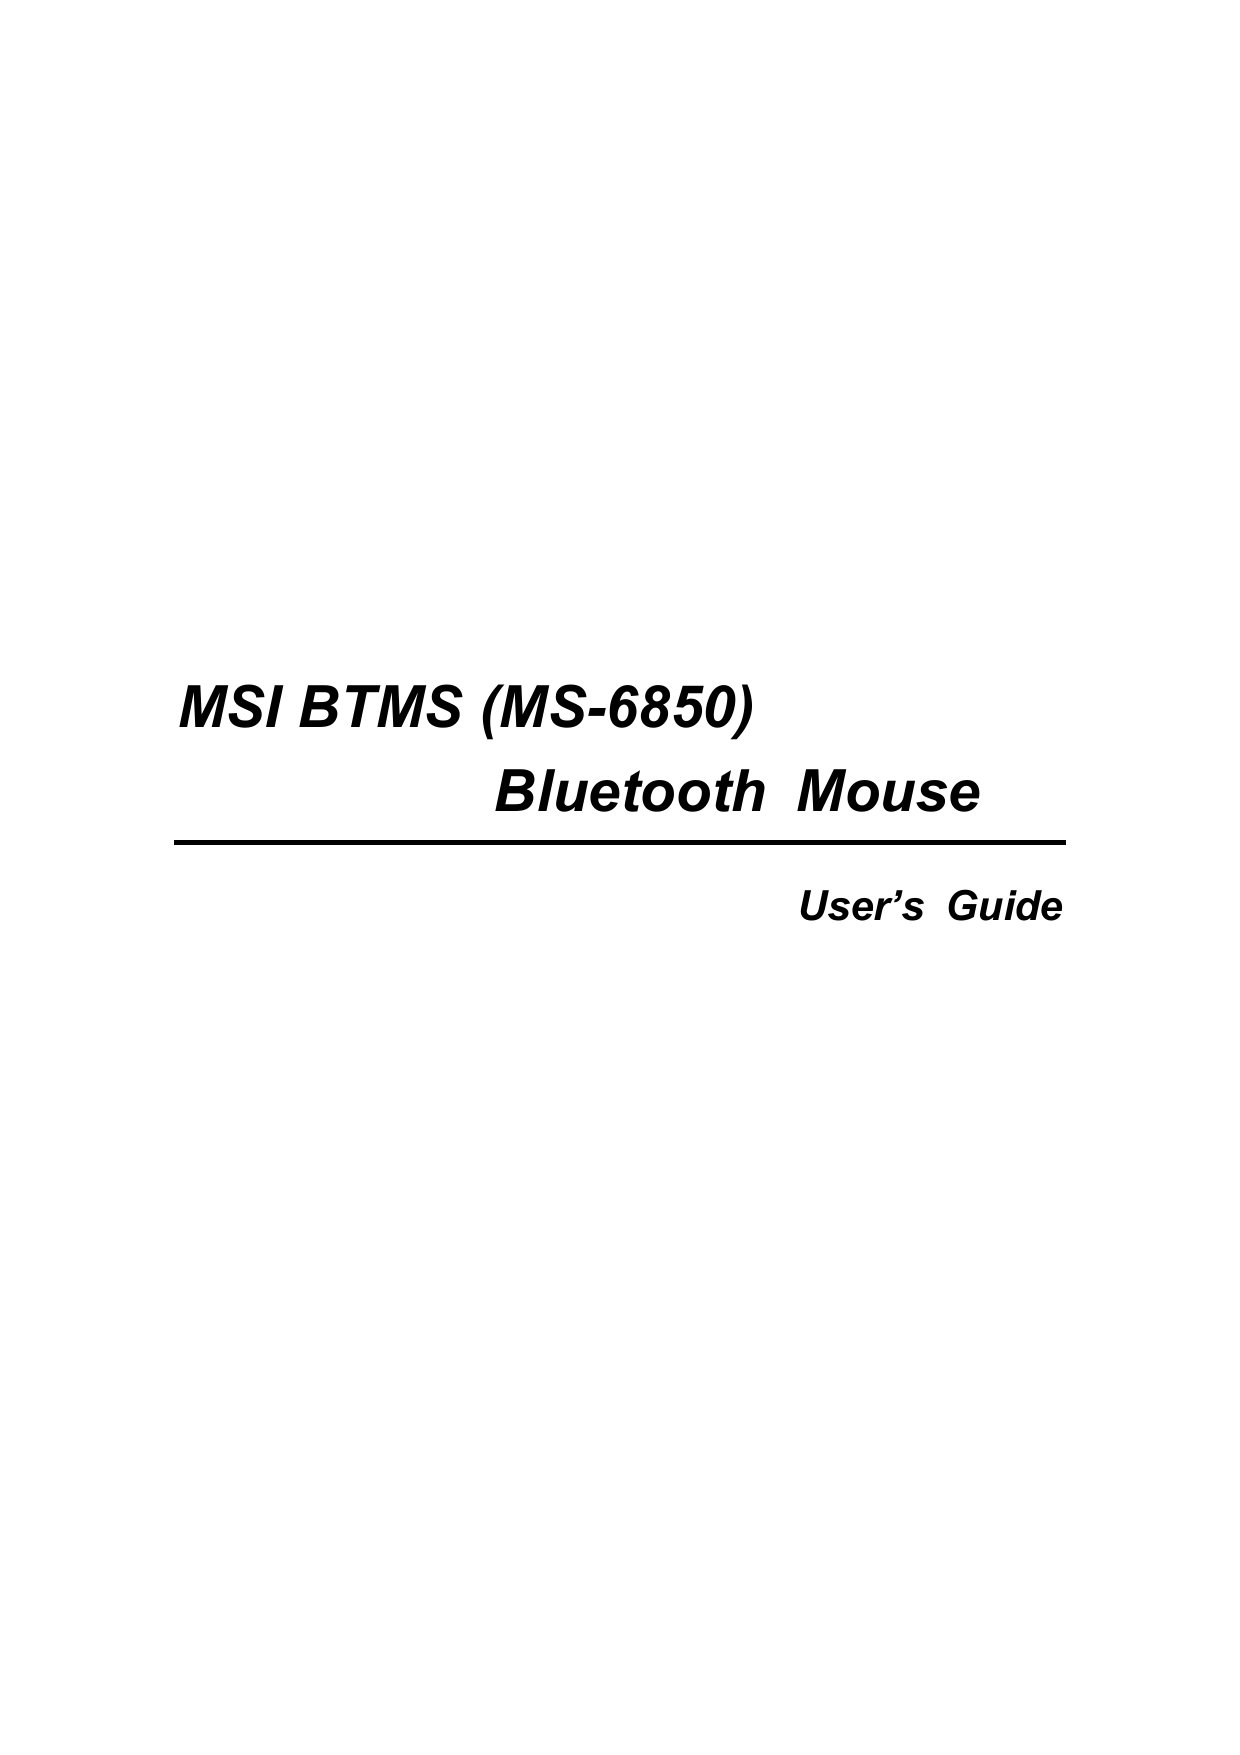  1           MSI BTMS (MS-6850)         Bluetooth Mouse  User’s Guide  